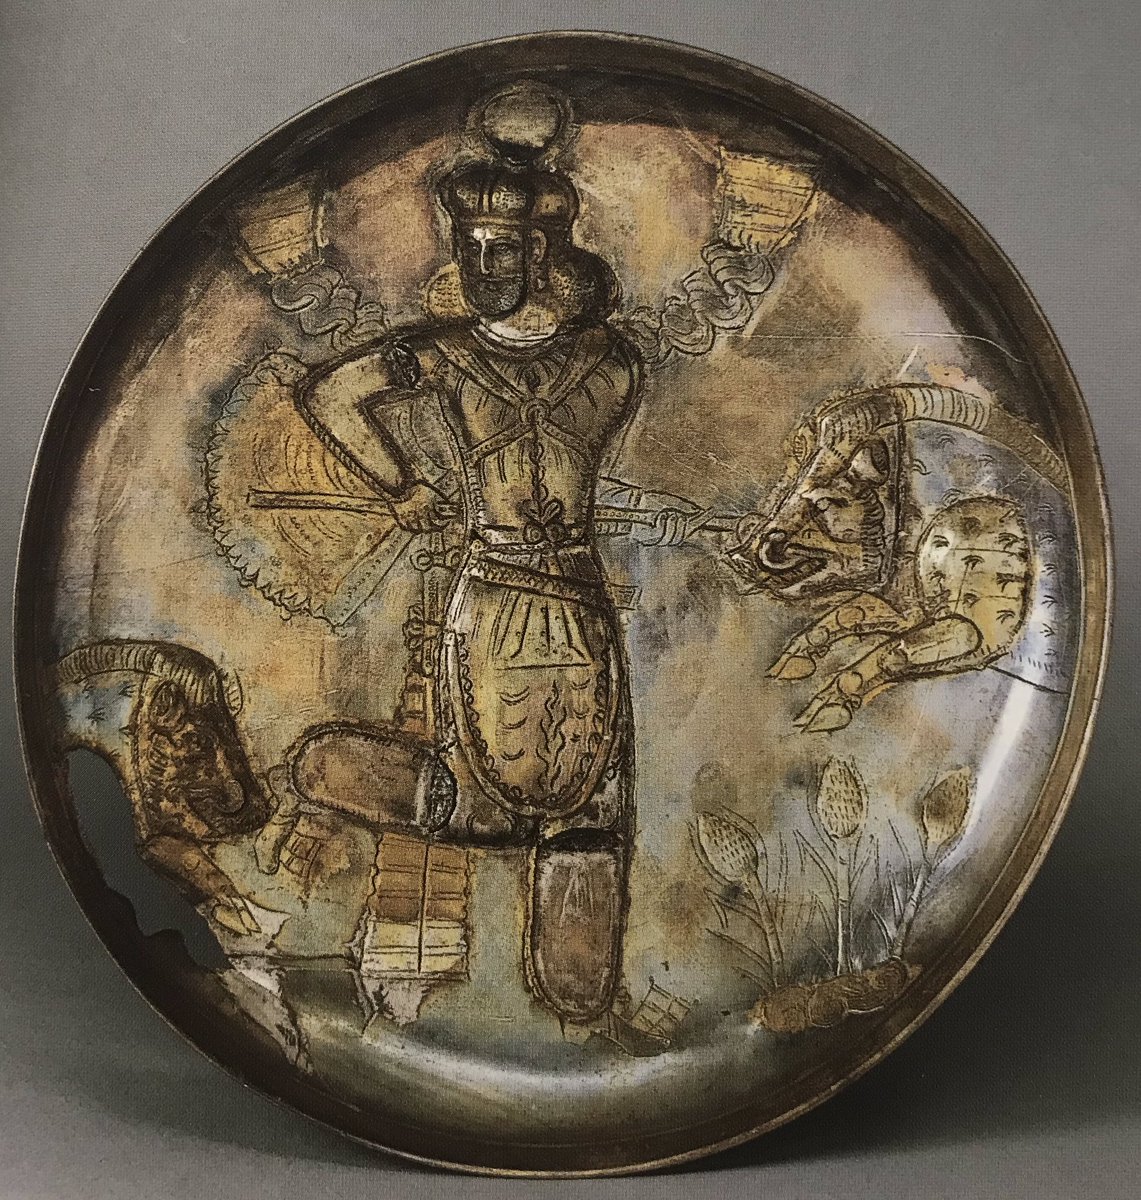 L: Silver plate with a royal figure hunting boars, unearthed in the tomb of a high-ranking general, possibly a gift granted by the Northern Wei emperor. R: Plate from Afghanistan with an almost identical composition, made when Central Asia was under the rule of Sasanian Persia.